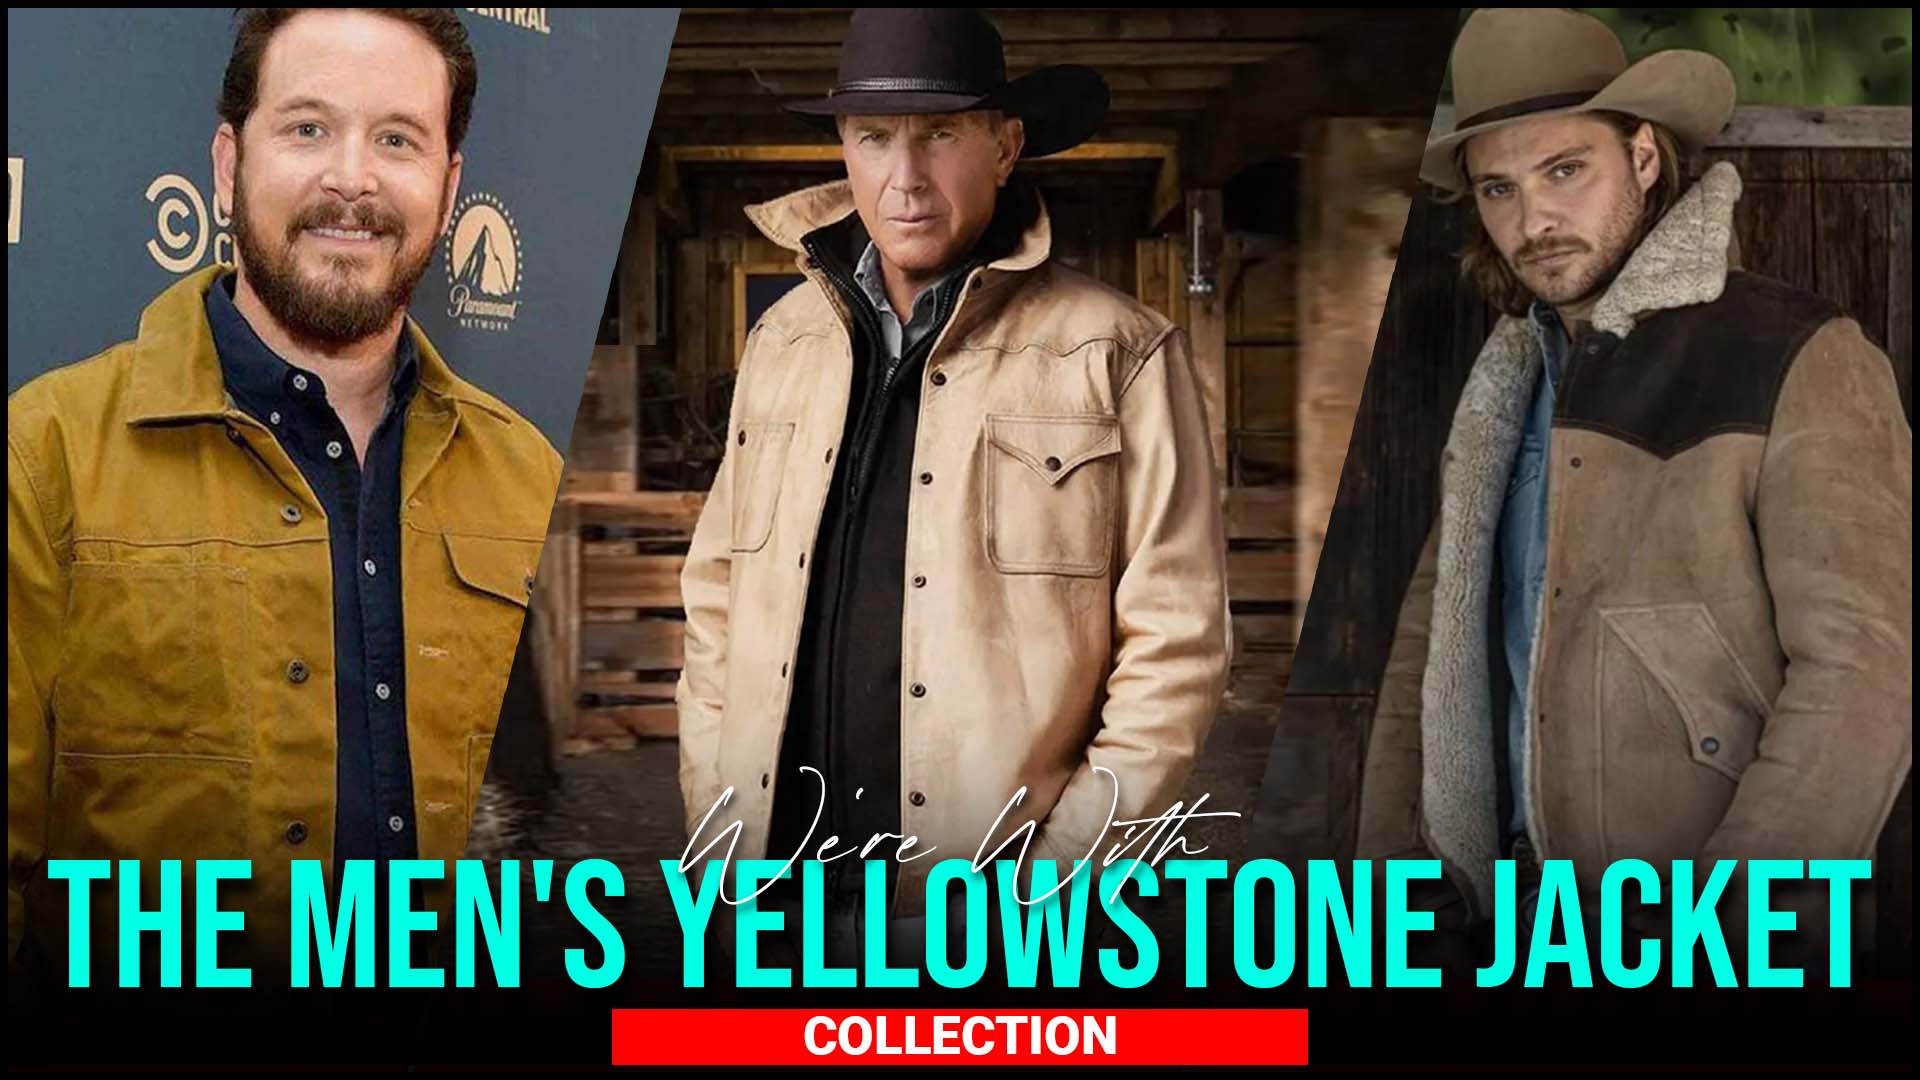 Men's Yellowstone Jacket Collection